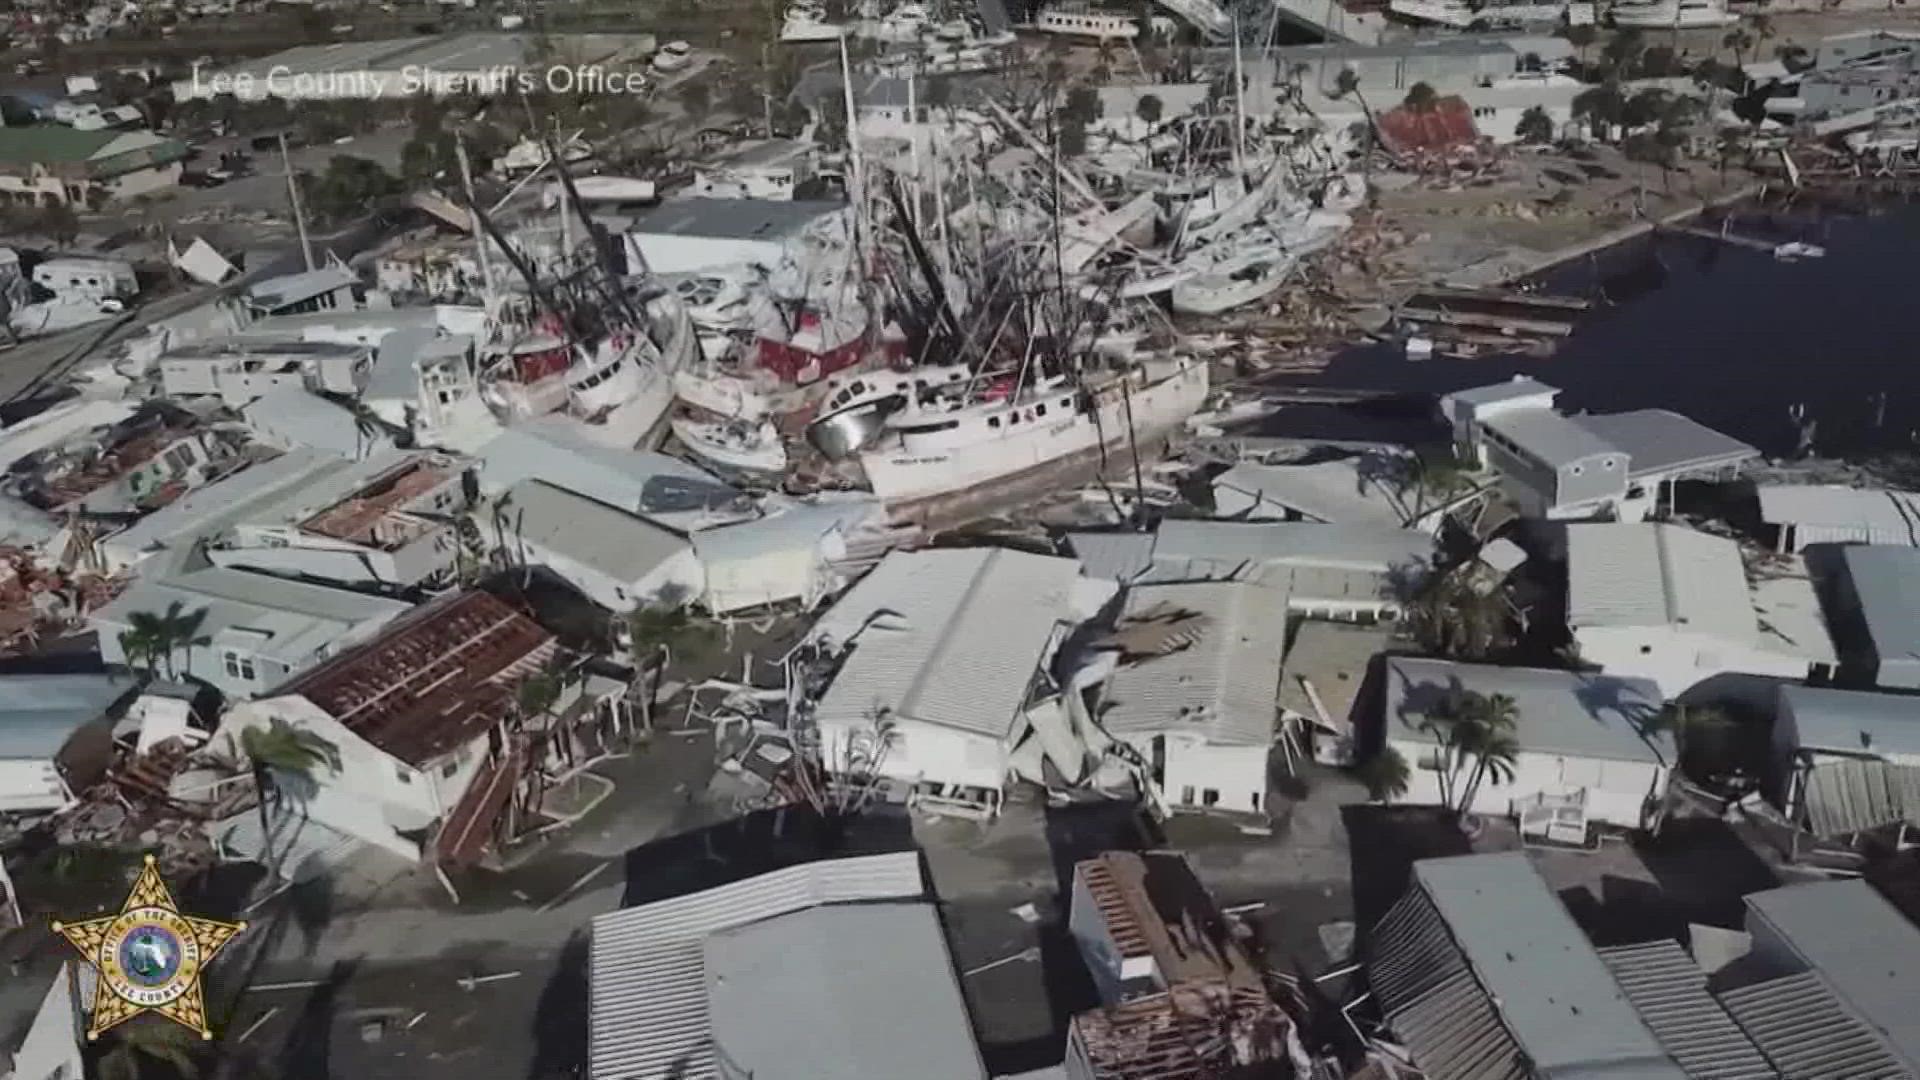 Search and rescue efforts continue amid cleanup of the destruction left behind by Hurricane Ian.